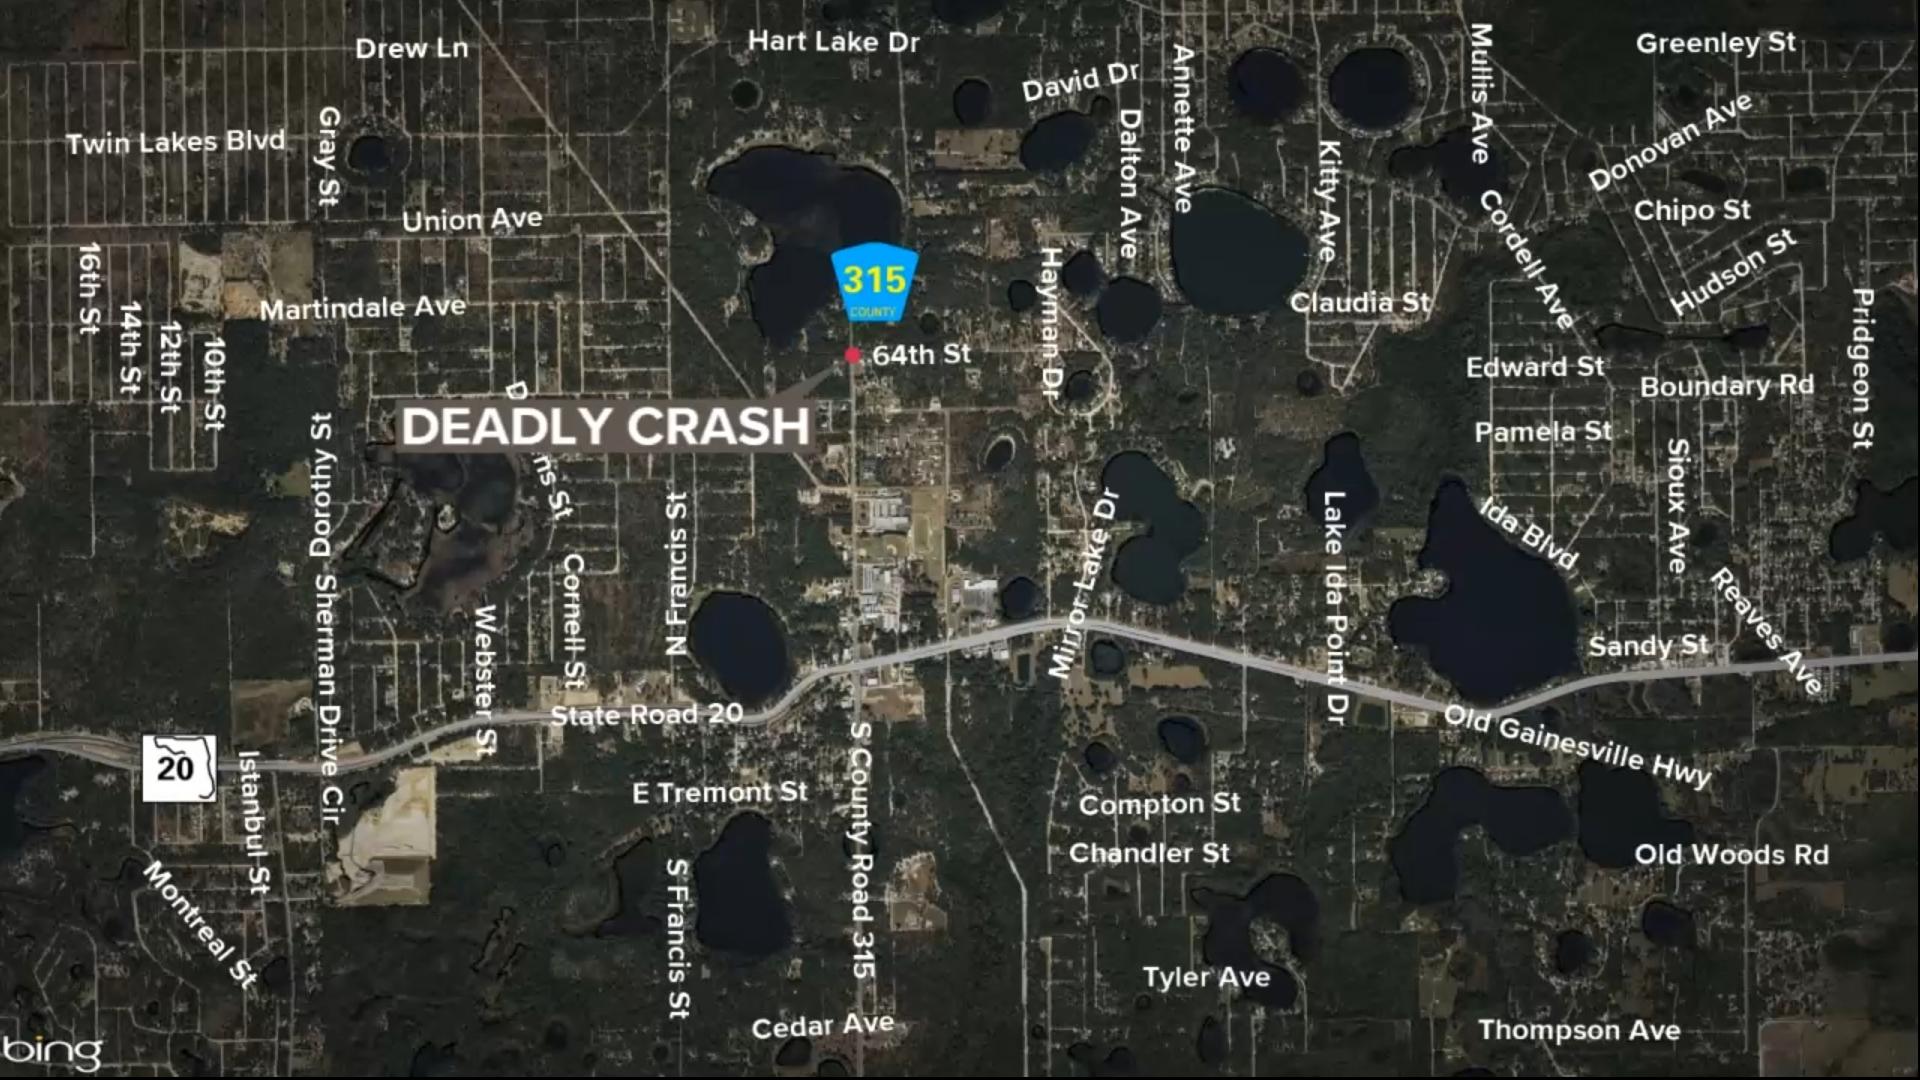 An FHP crash report states the driver of a pickup truck failed to yield to an oncoming vehicle when making a left turn, causing the crash.